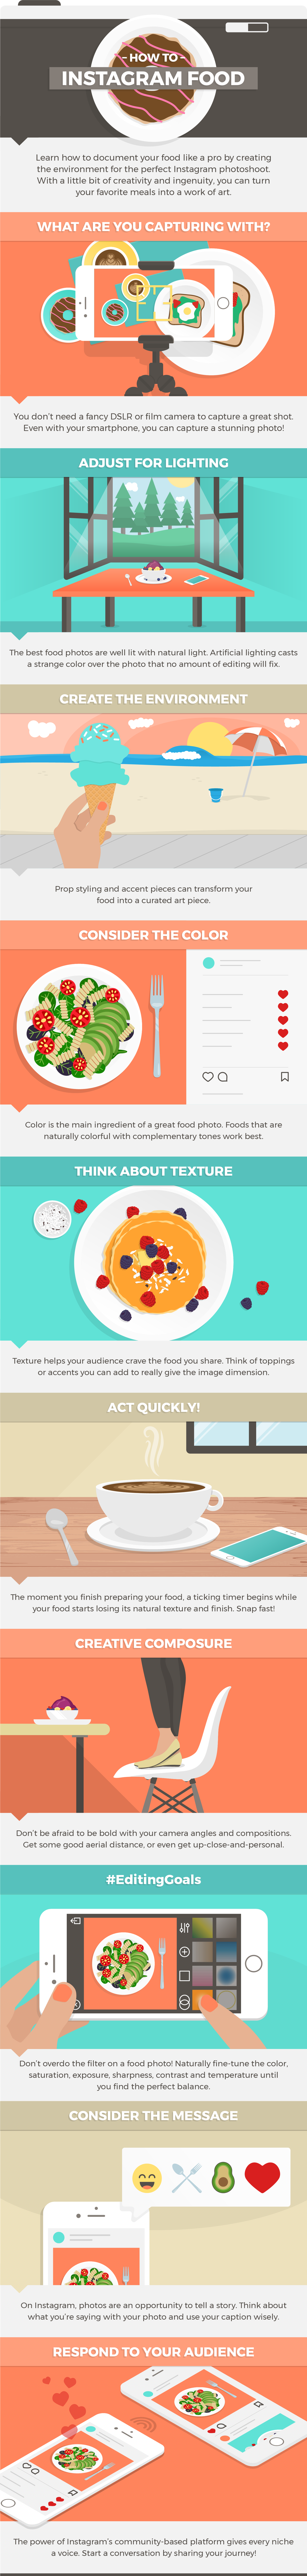 Infographic for How To Capture Food For Instagram and create an engaged following.